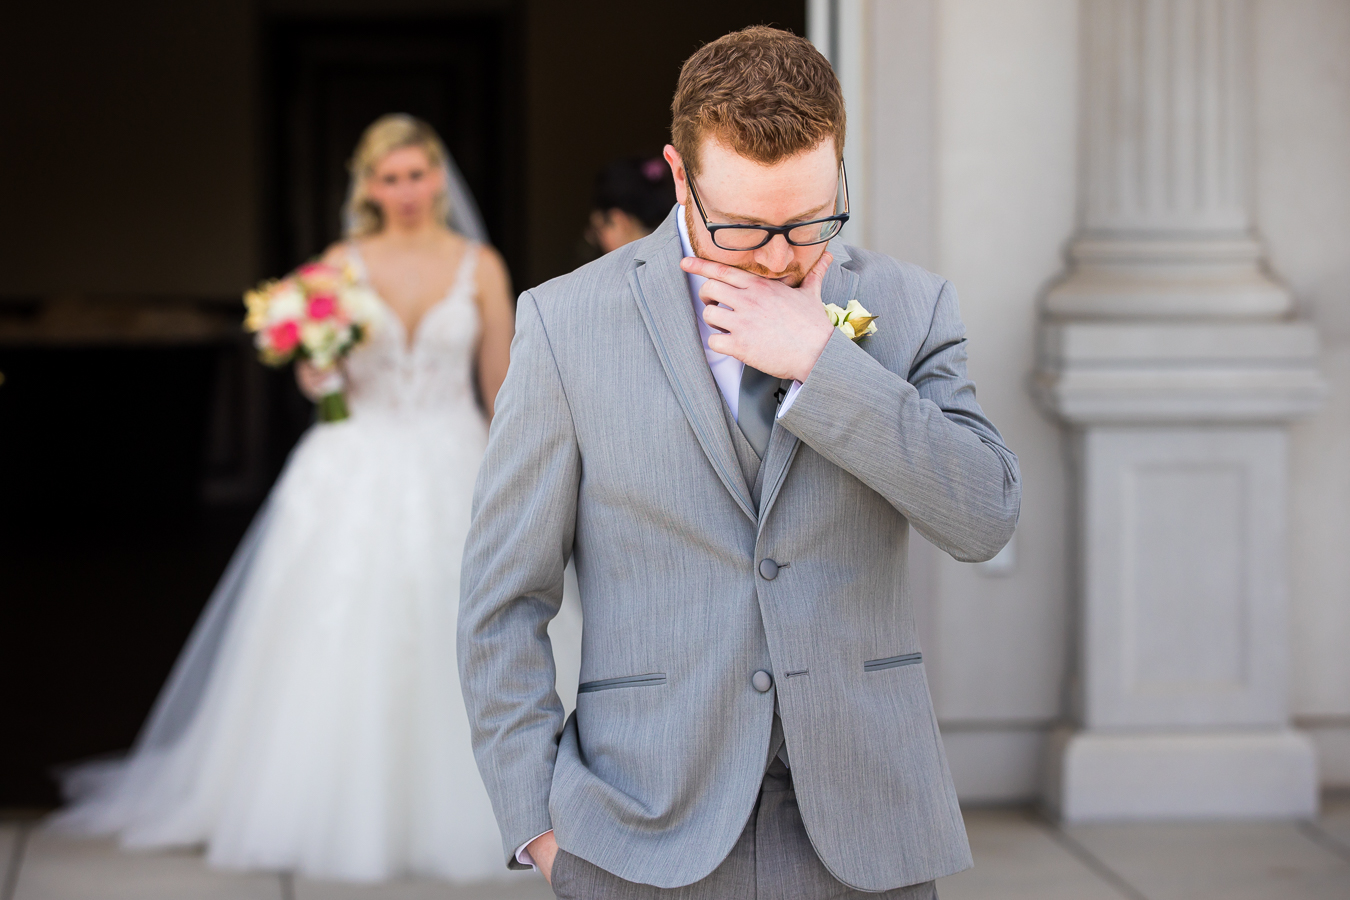 new jersey wedding photographer, rhinehart photography, captures this authentic moment before the couples first look on their wedding day at the palace 